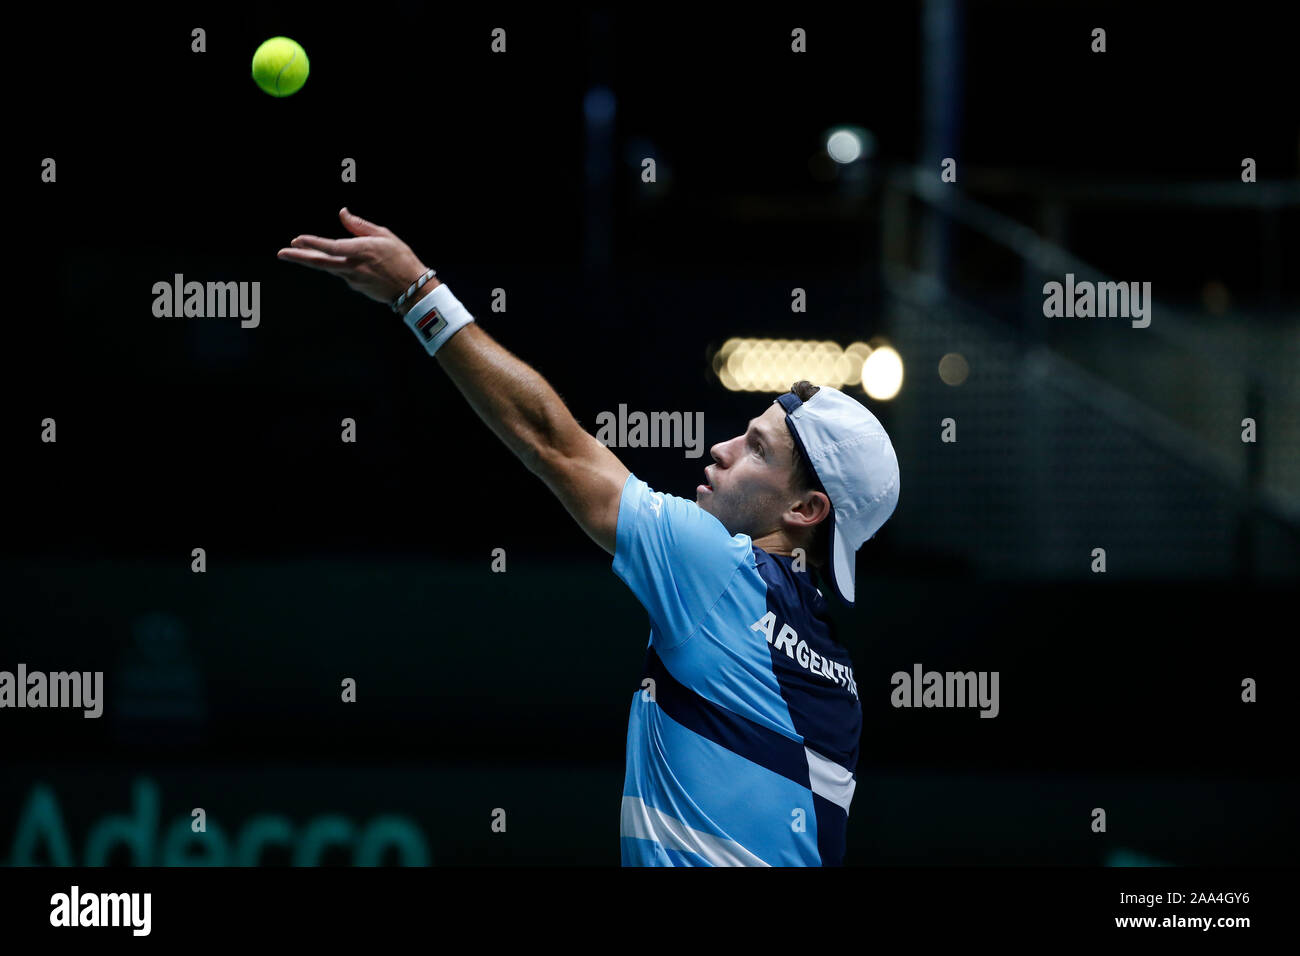 Diego Schwartzman of Argentina in action during the singles match against Cristian Garin of Chile on Day 2 of the 2019 Davis Cup at La Caja Magica. Stock Photo